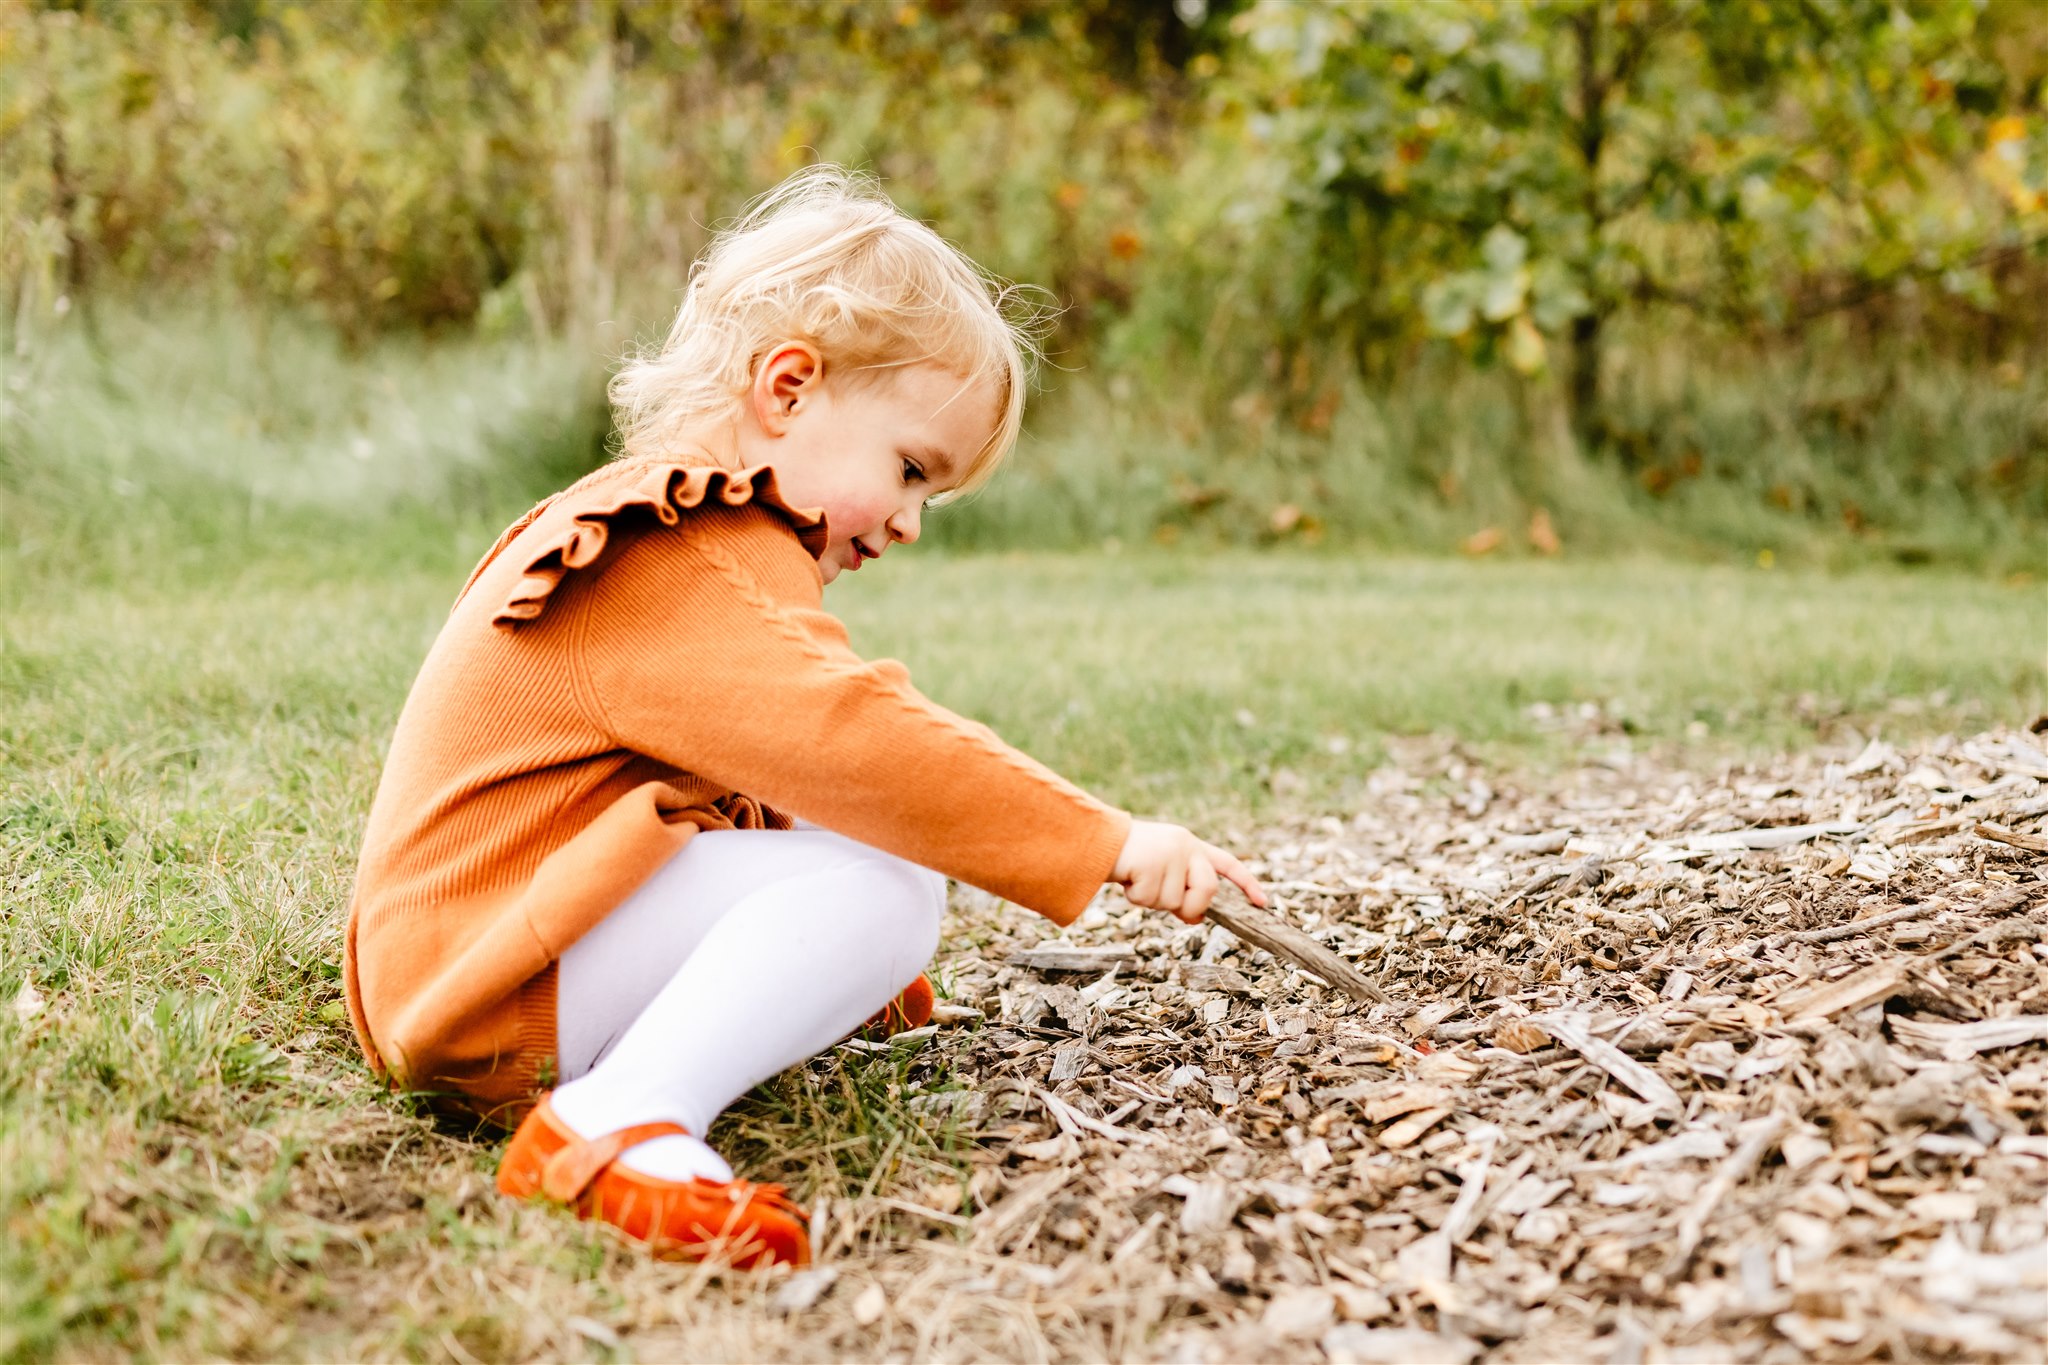 A young girl in an orange dress plays with sticks in a park on the ground before visiting Kid Friendly Restaurants Naperville